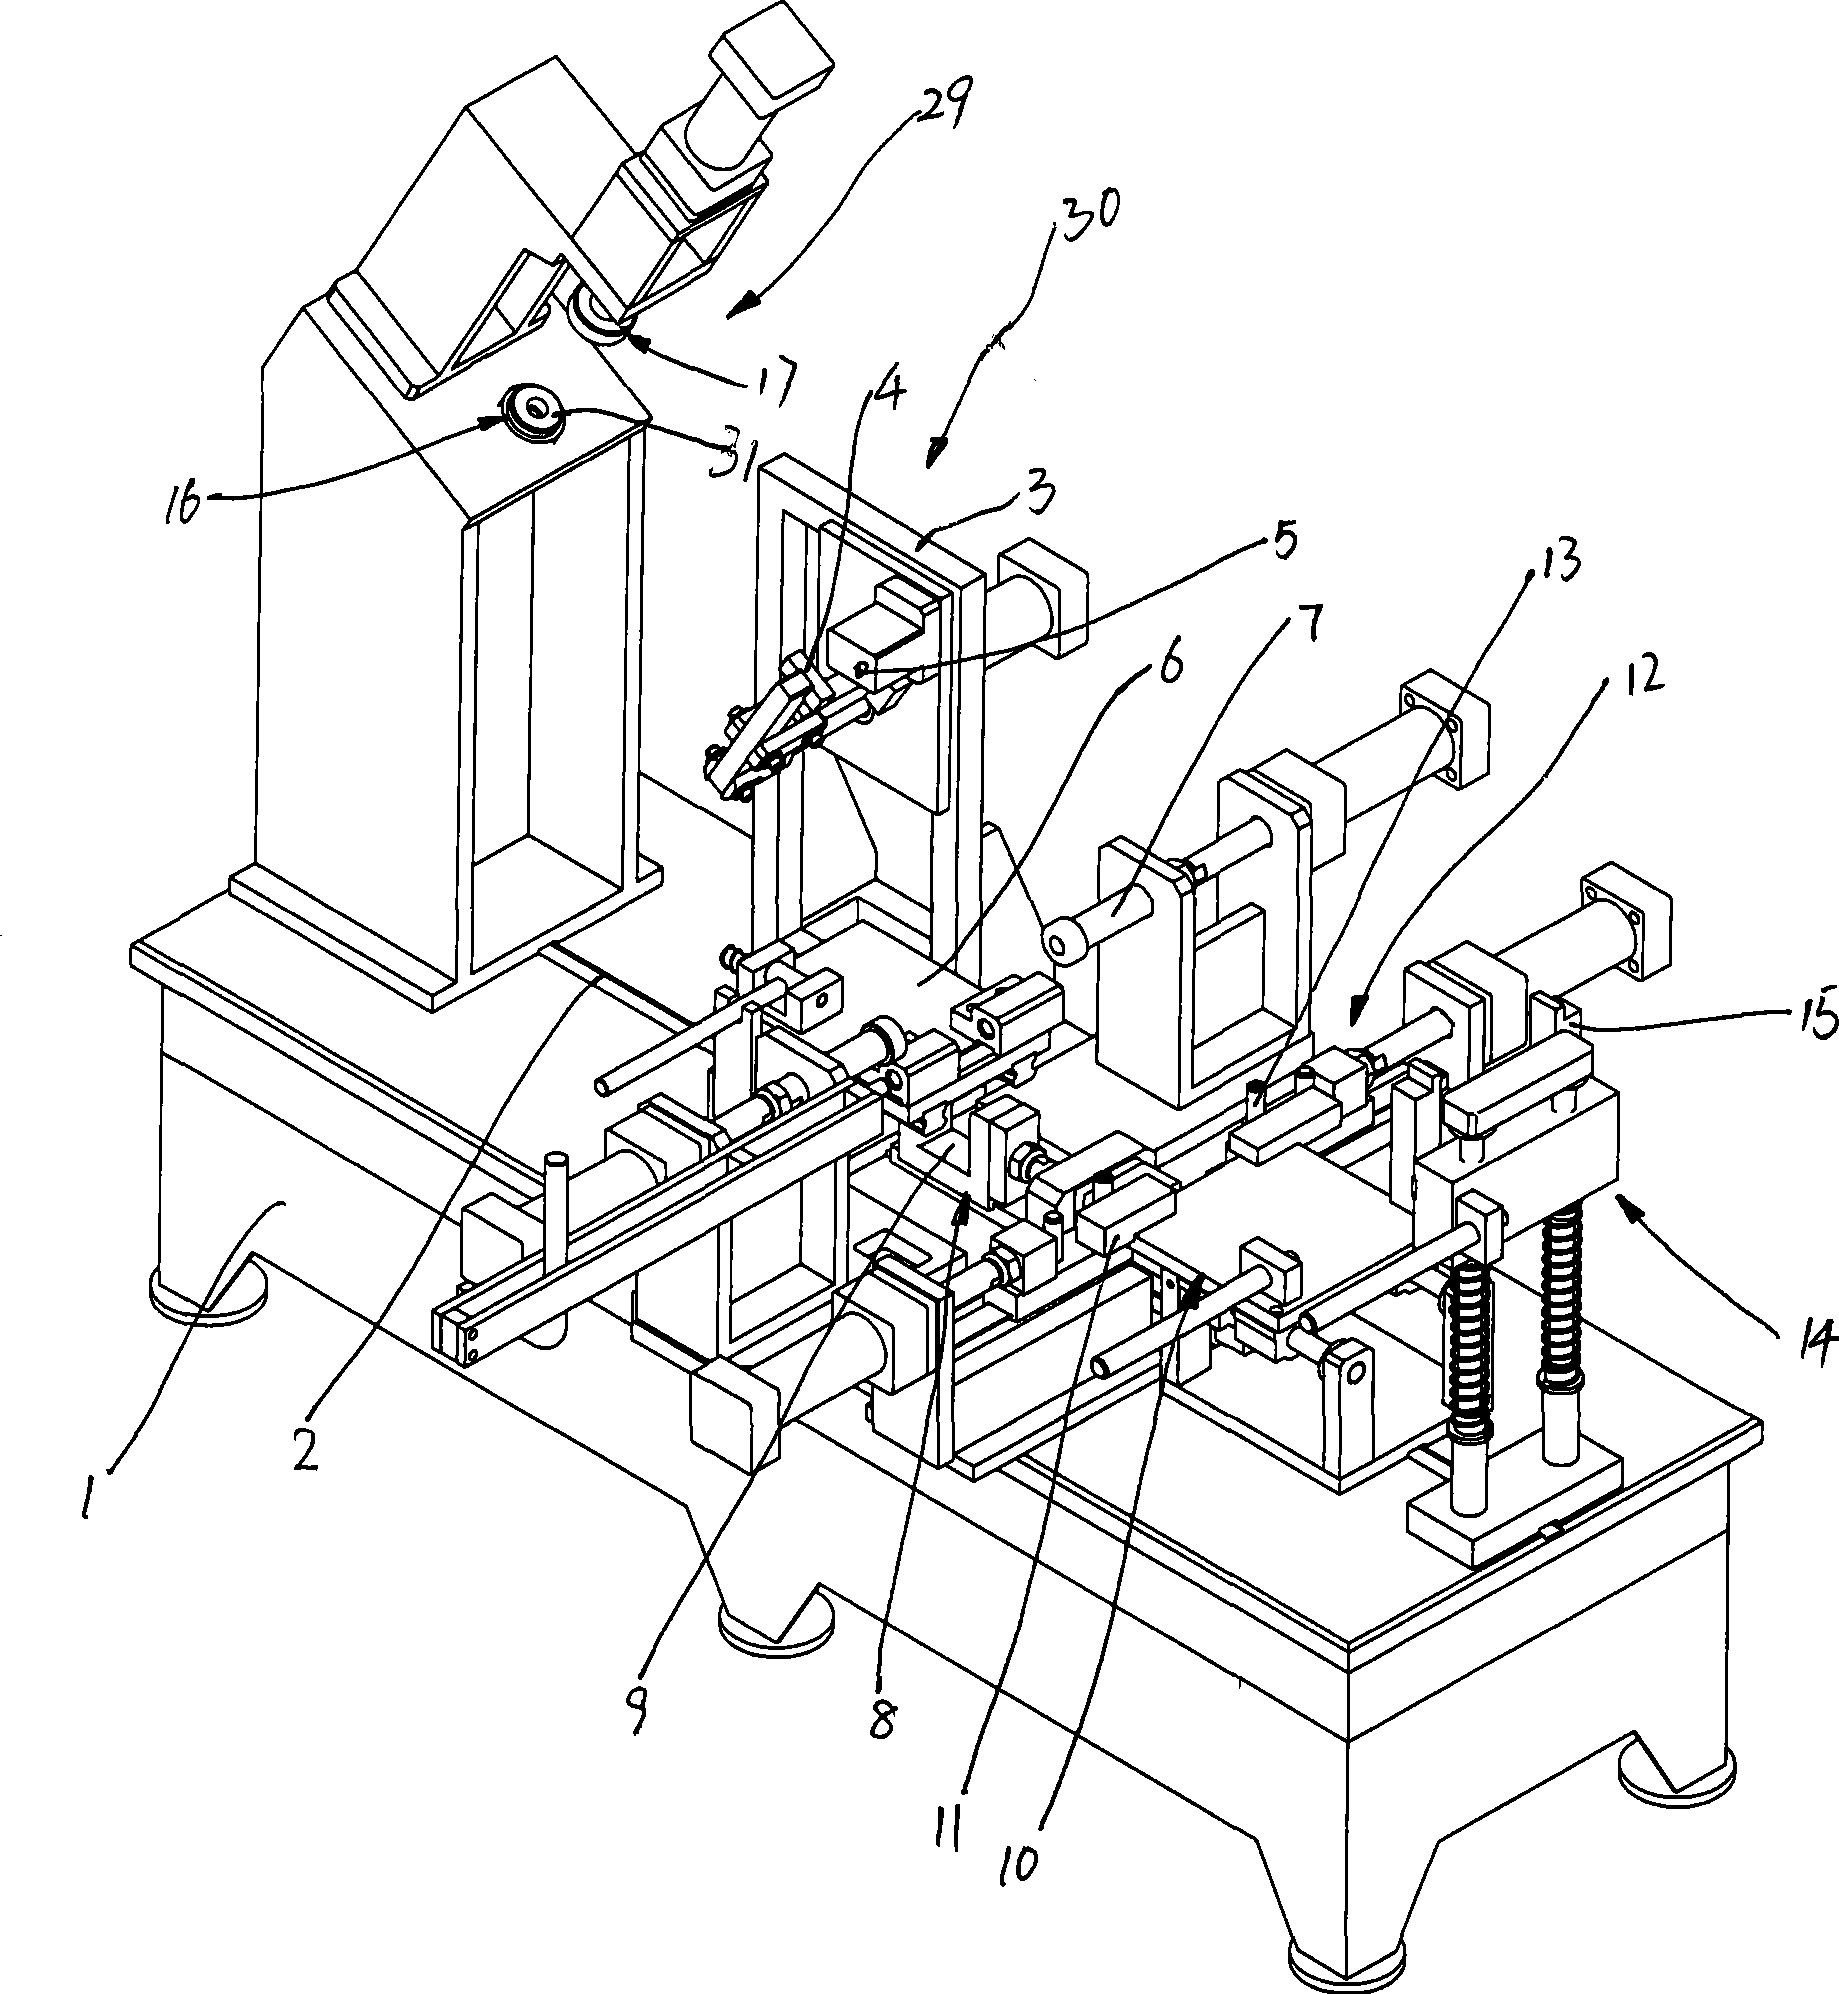 Clamping fixture for correcting vehicle frame